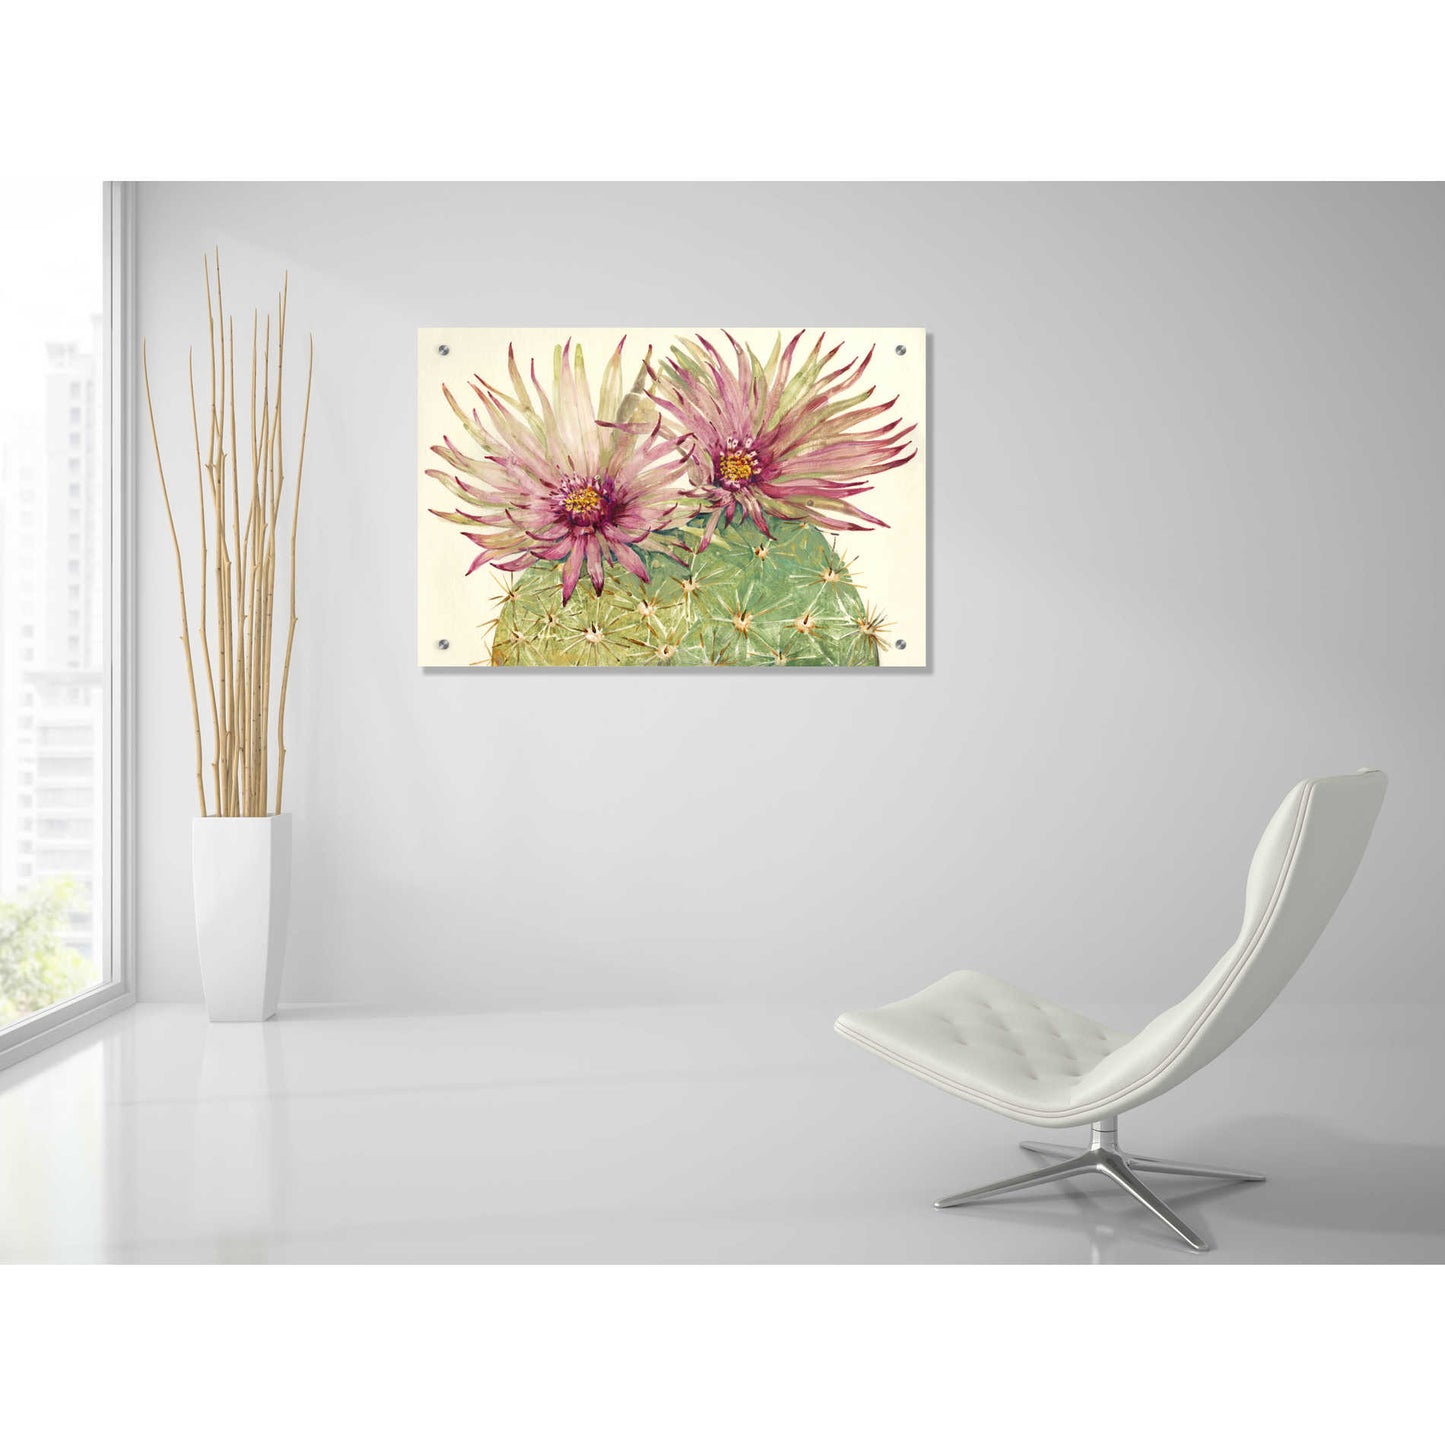 Epic Art 'Cactus Blossoms I' by Tim O'Toole, Acrylic Glass Wall Art,36x24